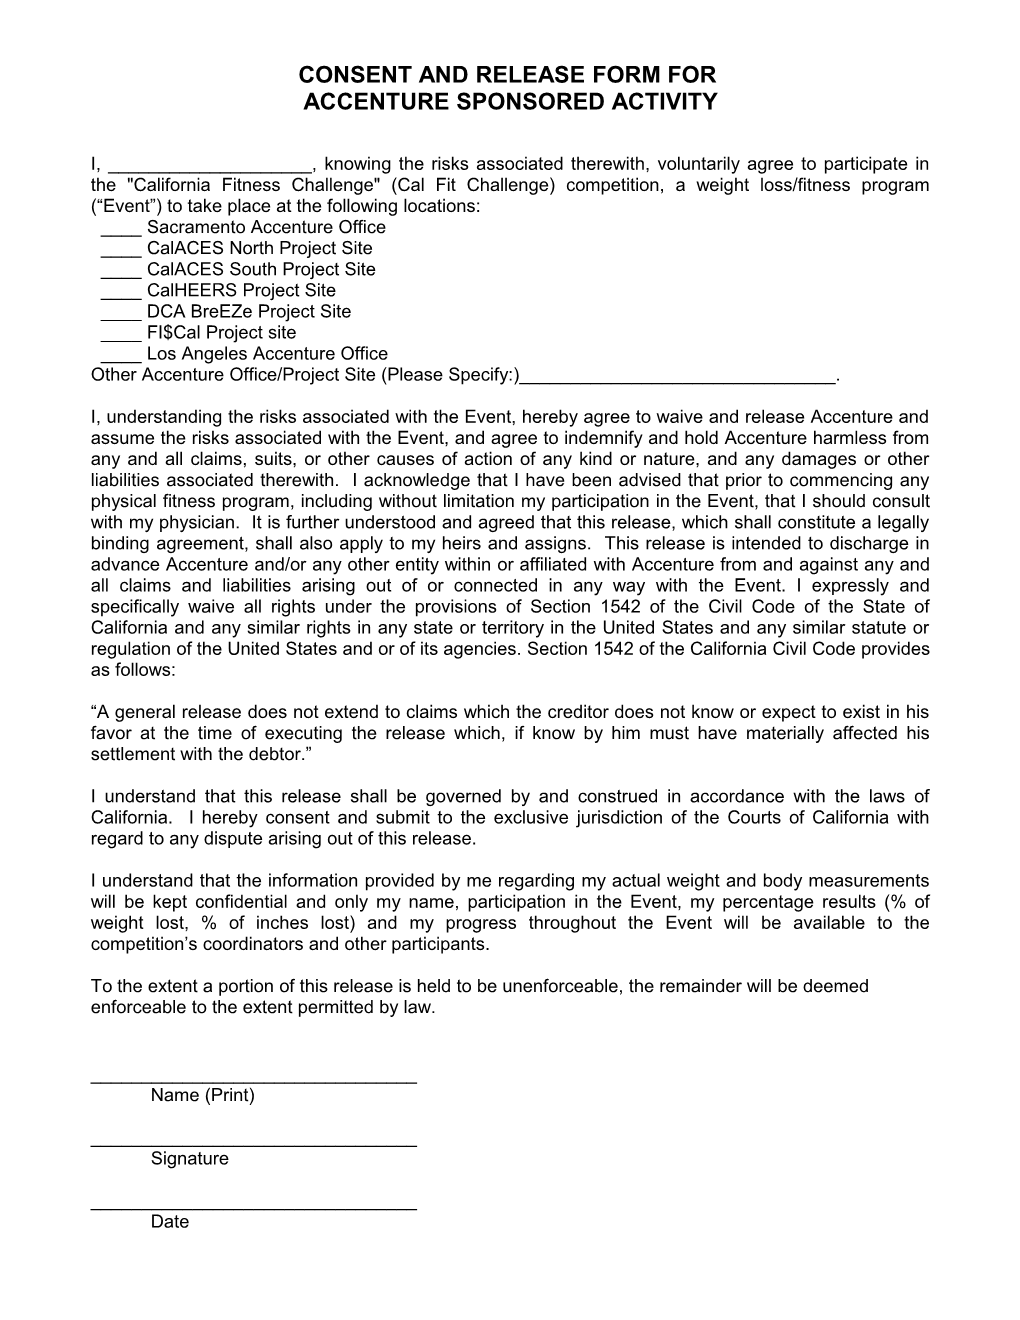 Consent and Release Form For